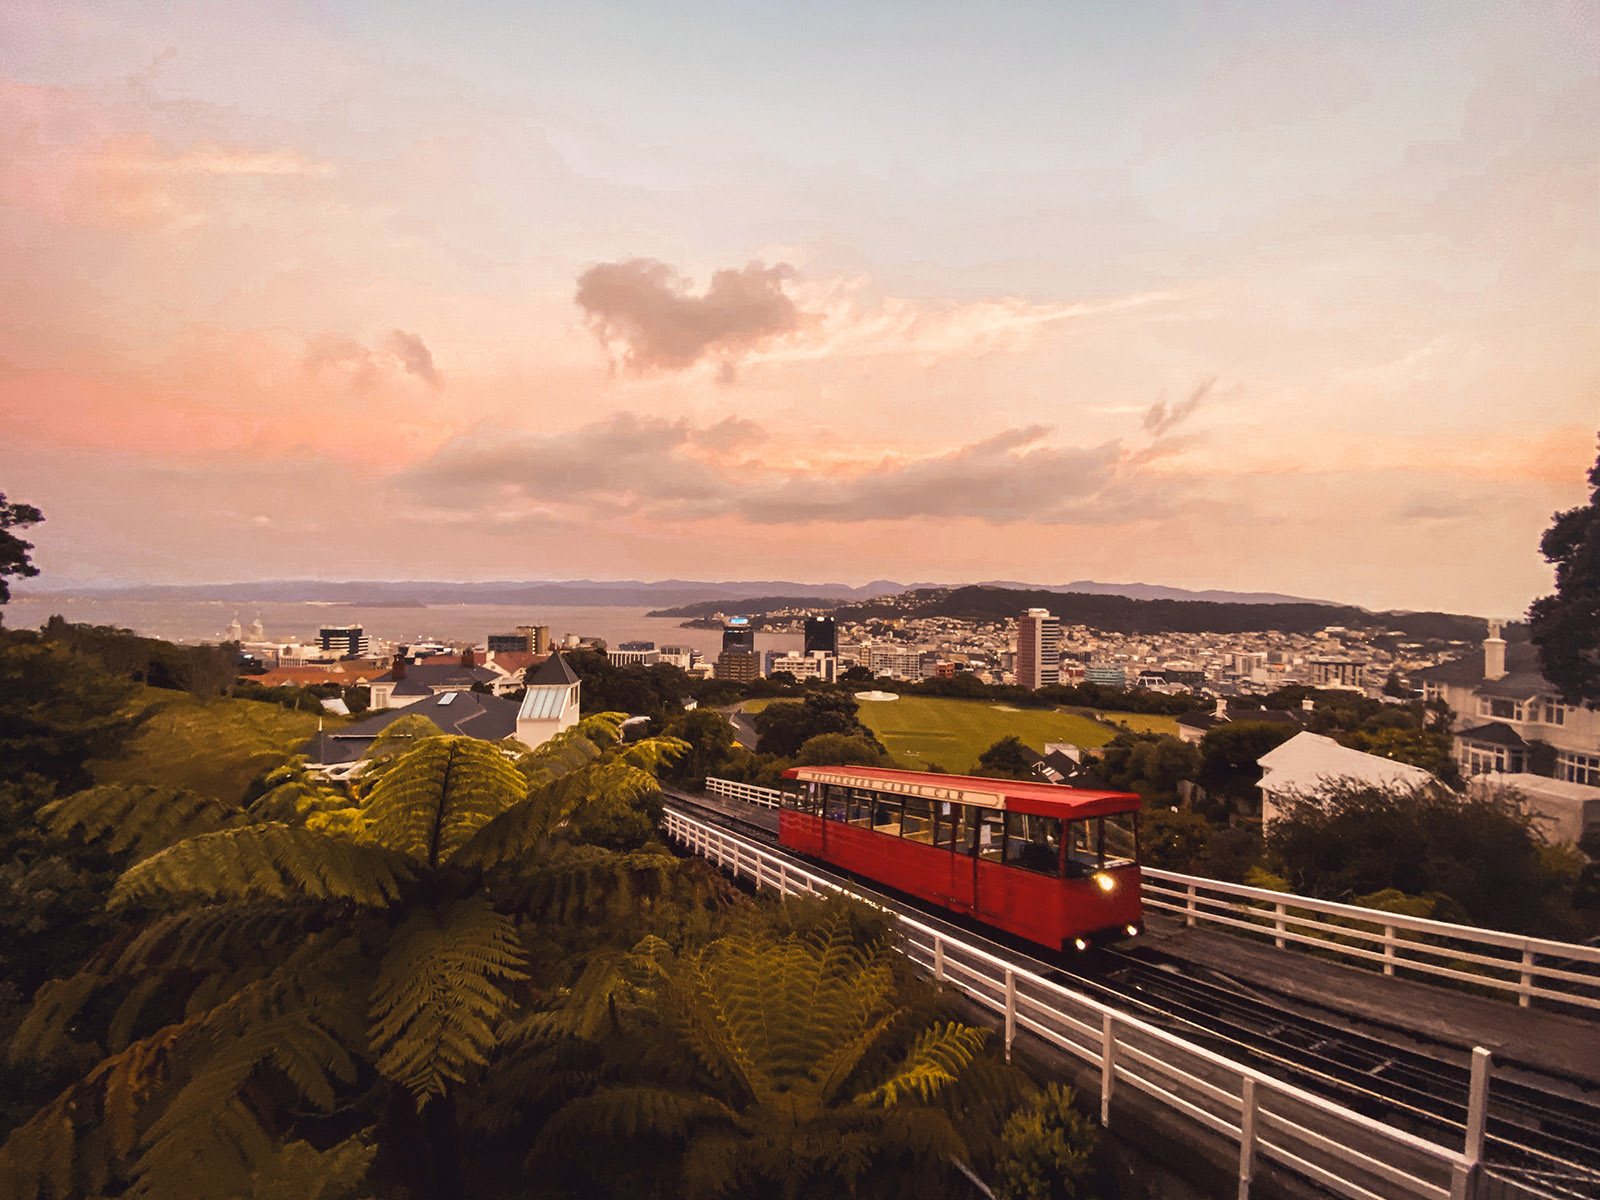 a red tram car on the hill overlooking wellington, new zealand